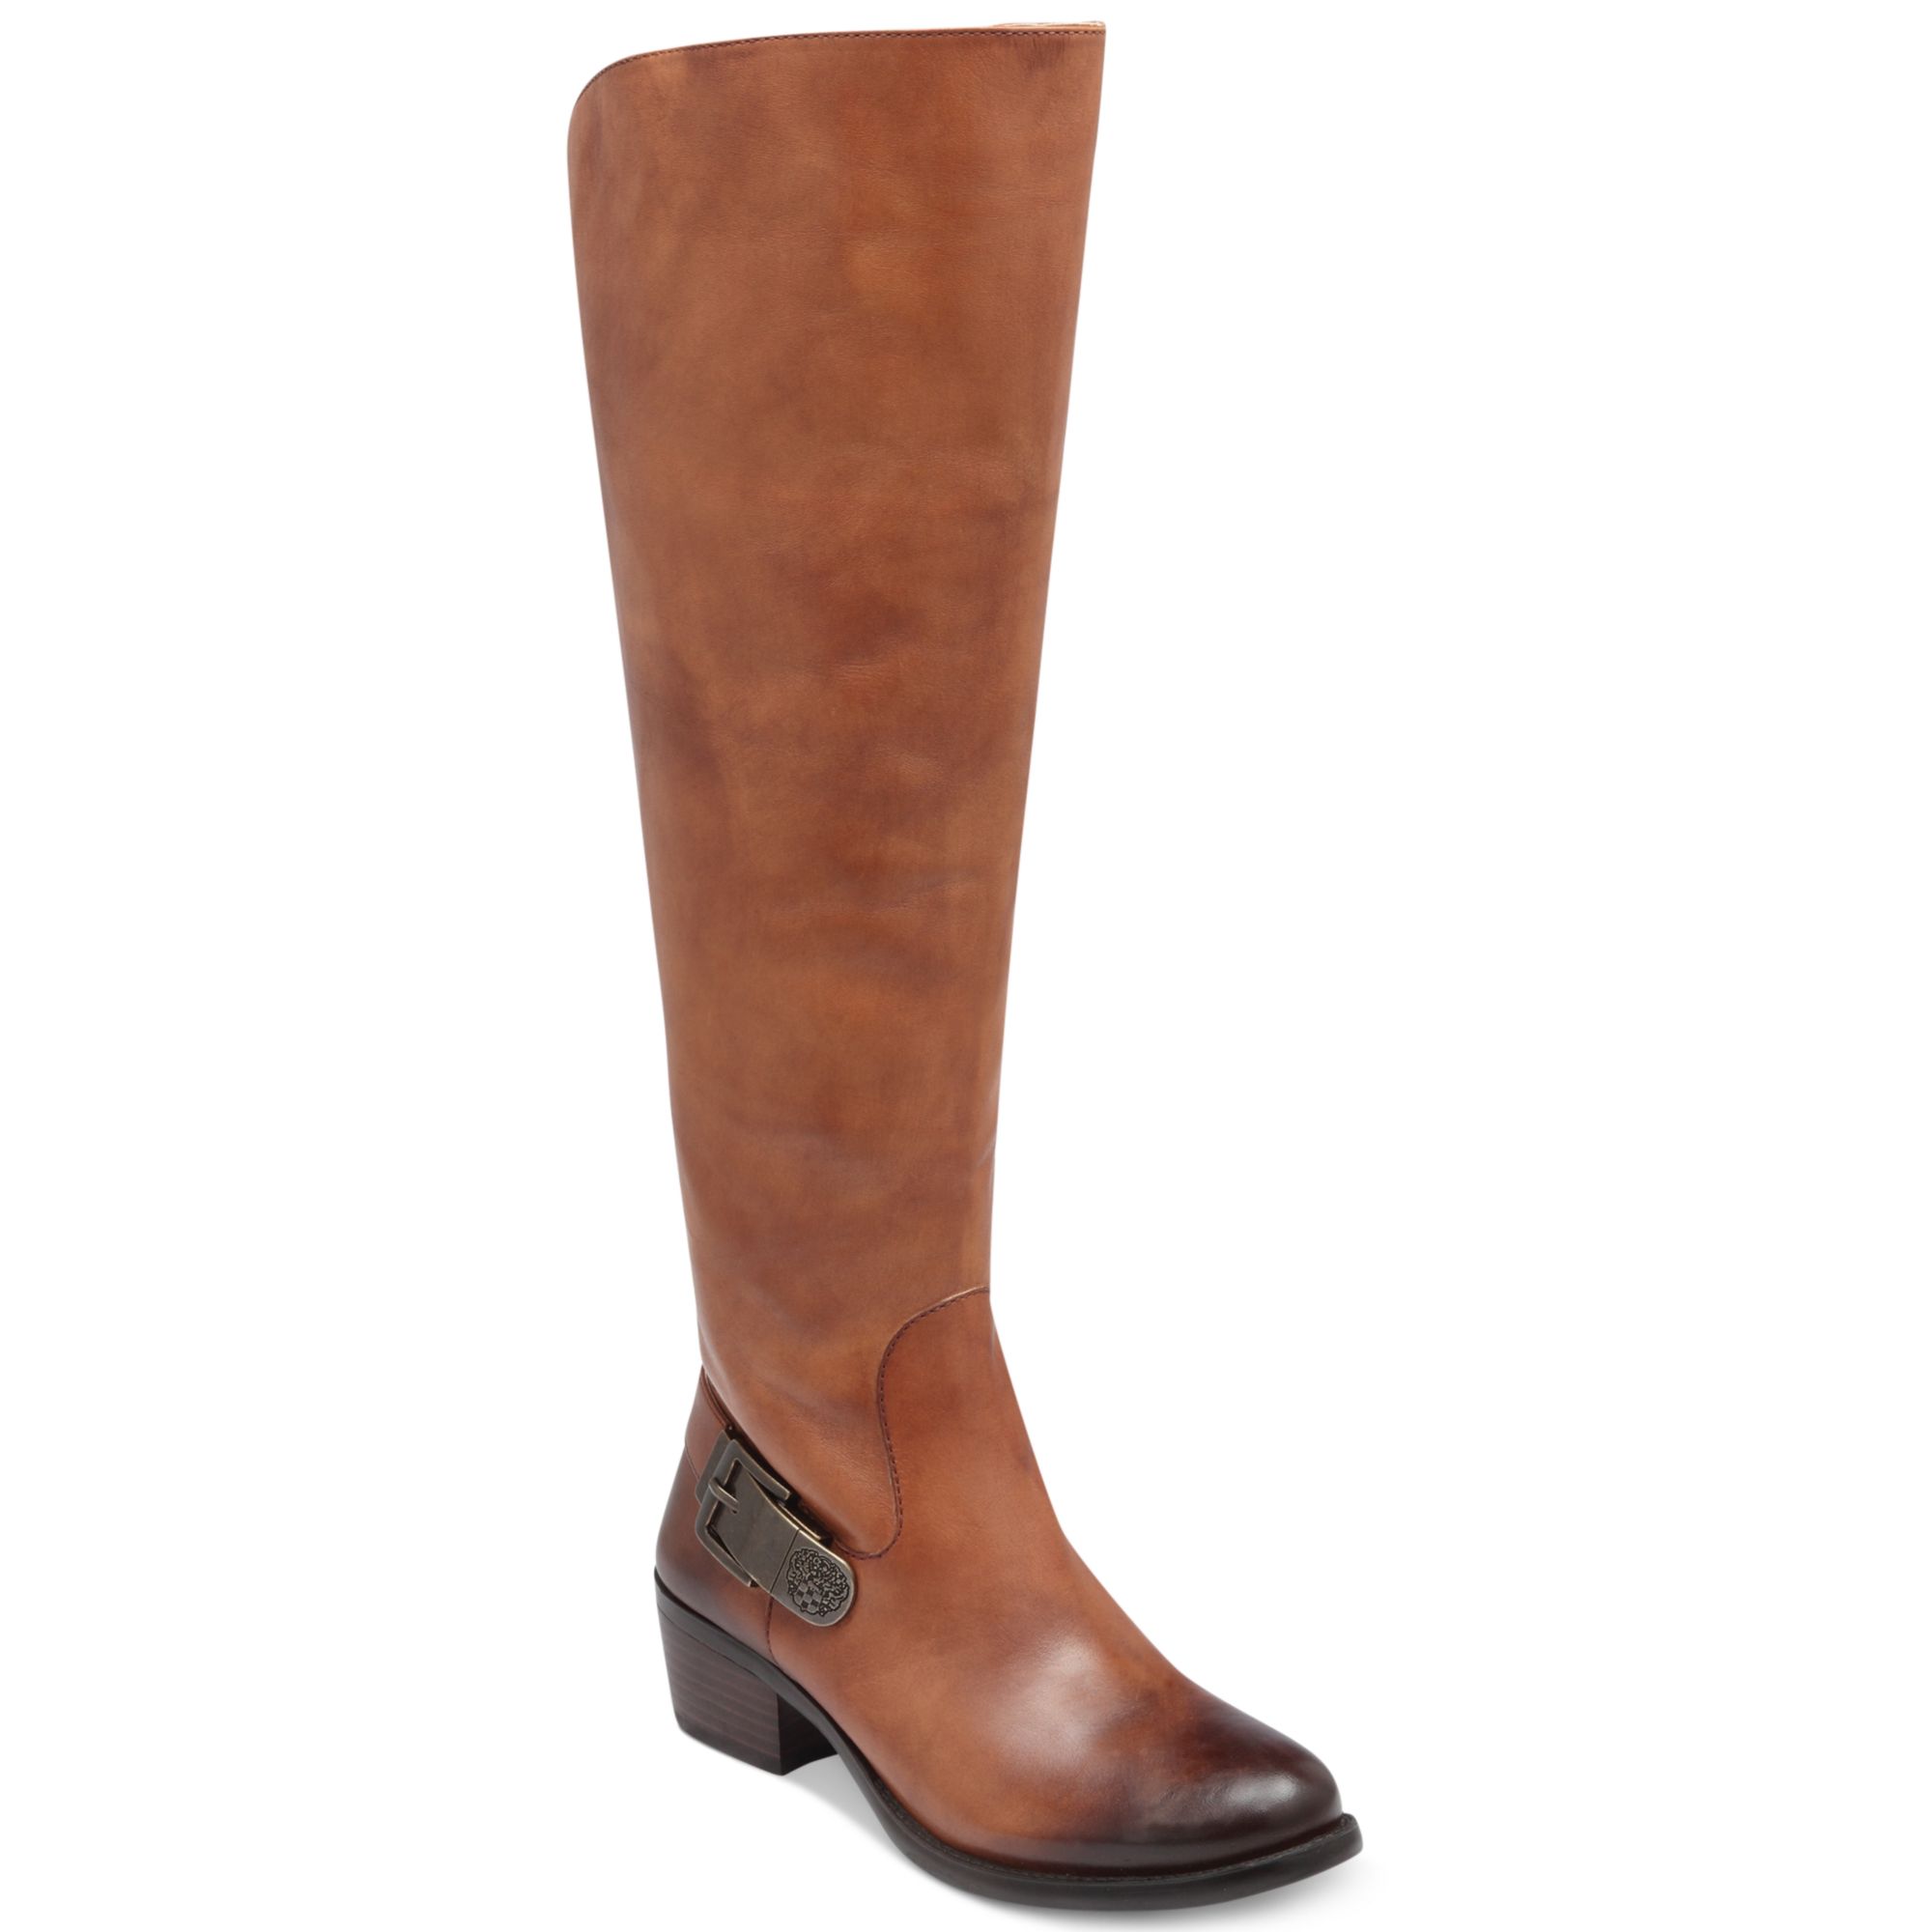 Lyst - Vince camuto Bedina Wide Calf Tall Riding Boots in Brown